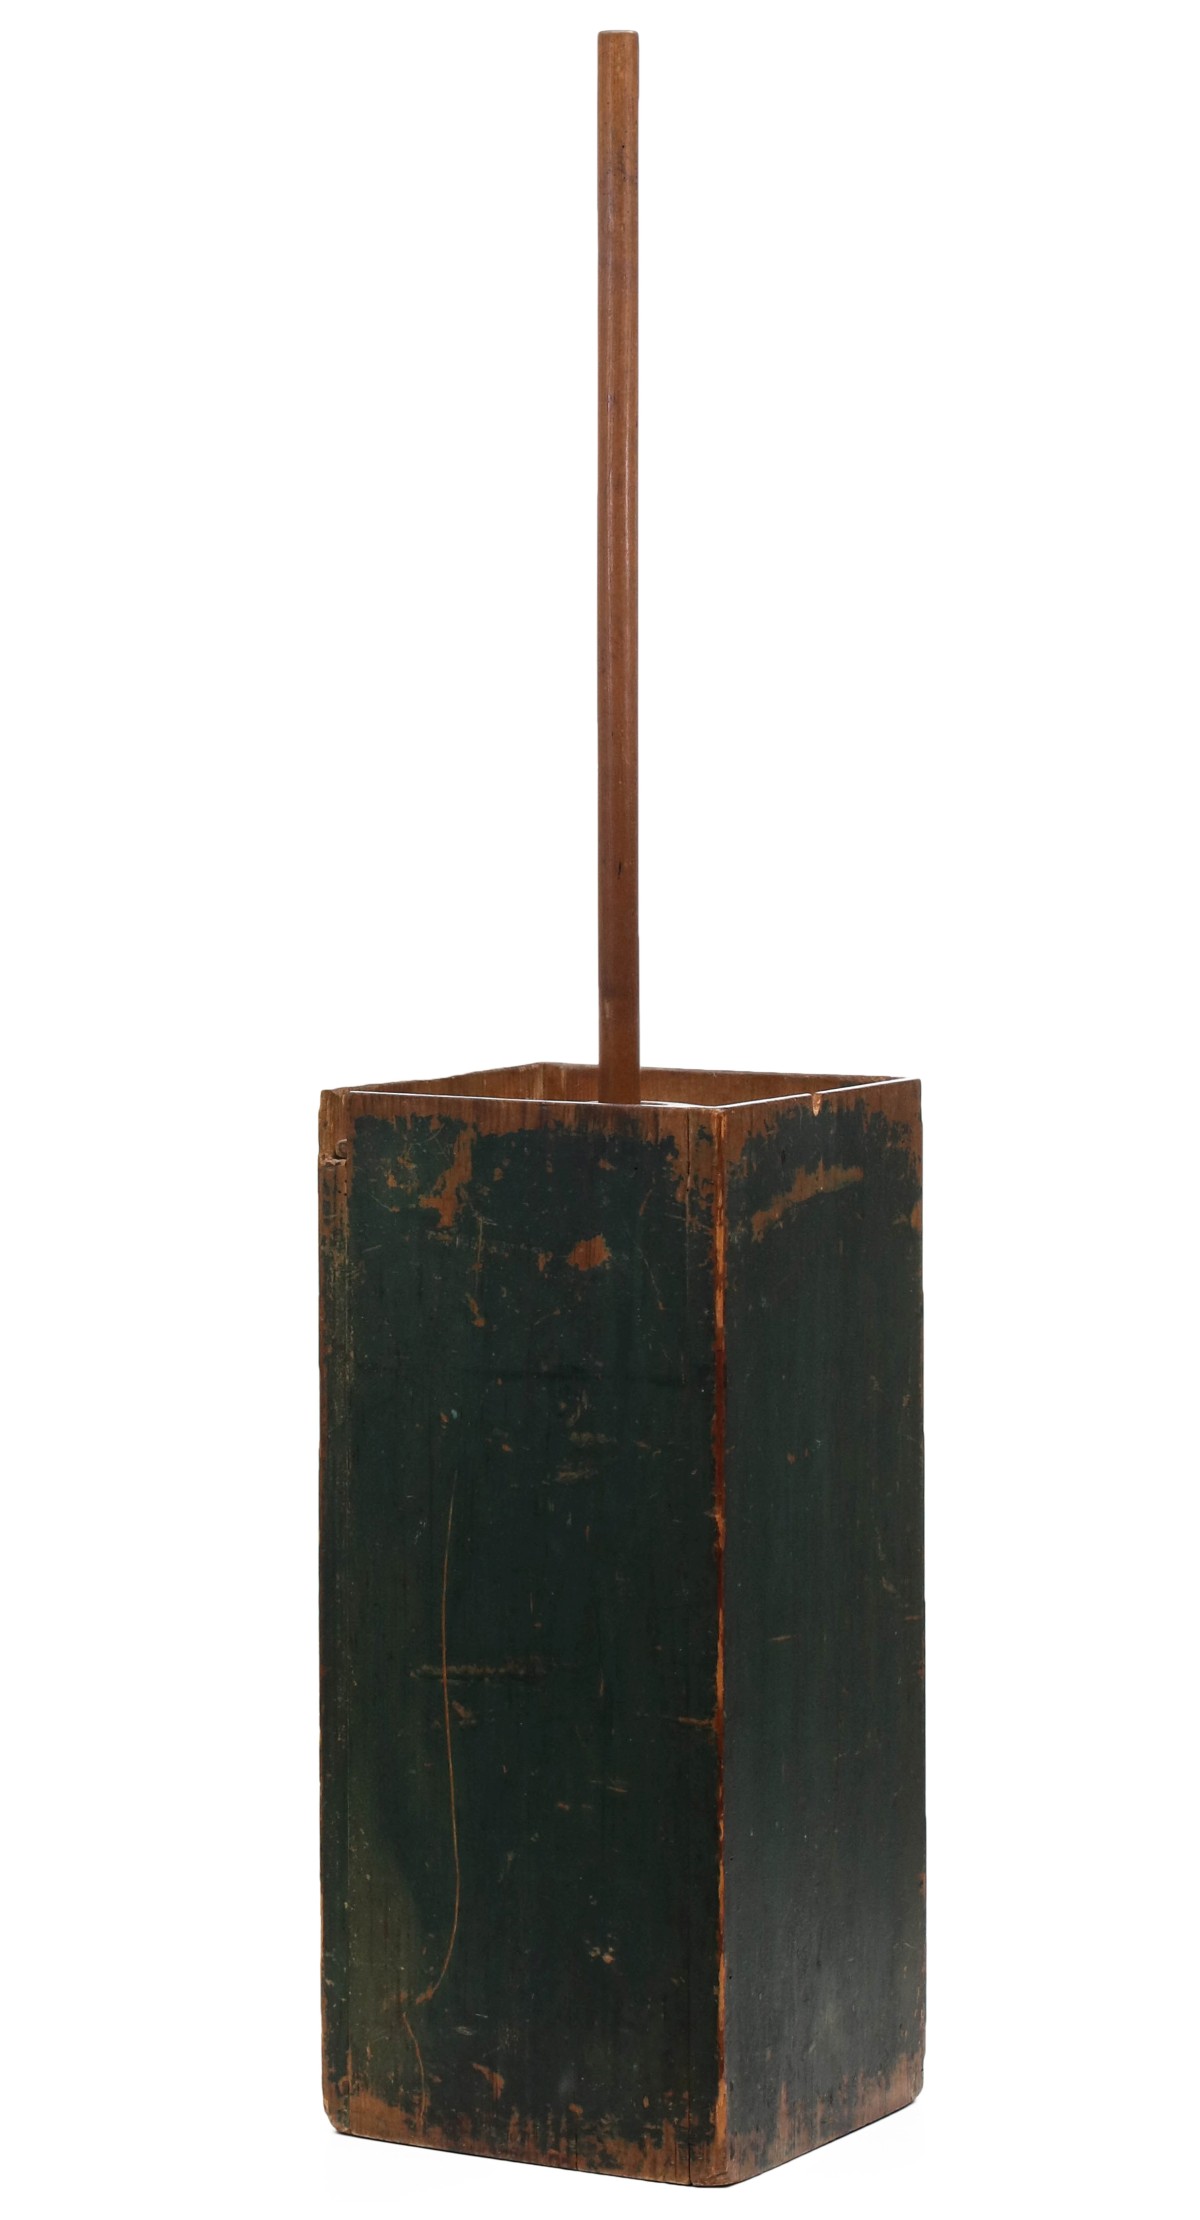 A TALL SQUARE PINE BUTTER CHURN IN ORIGINAL GREEN PAINT